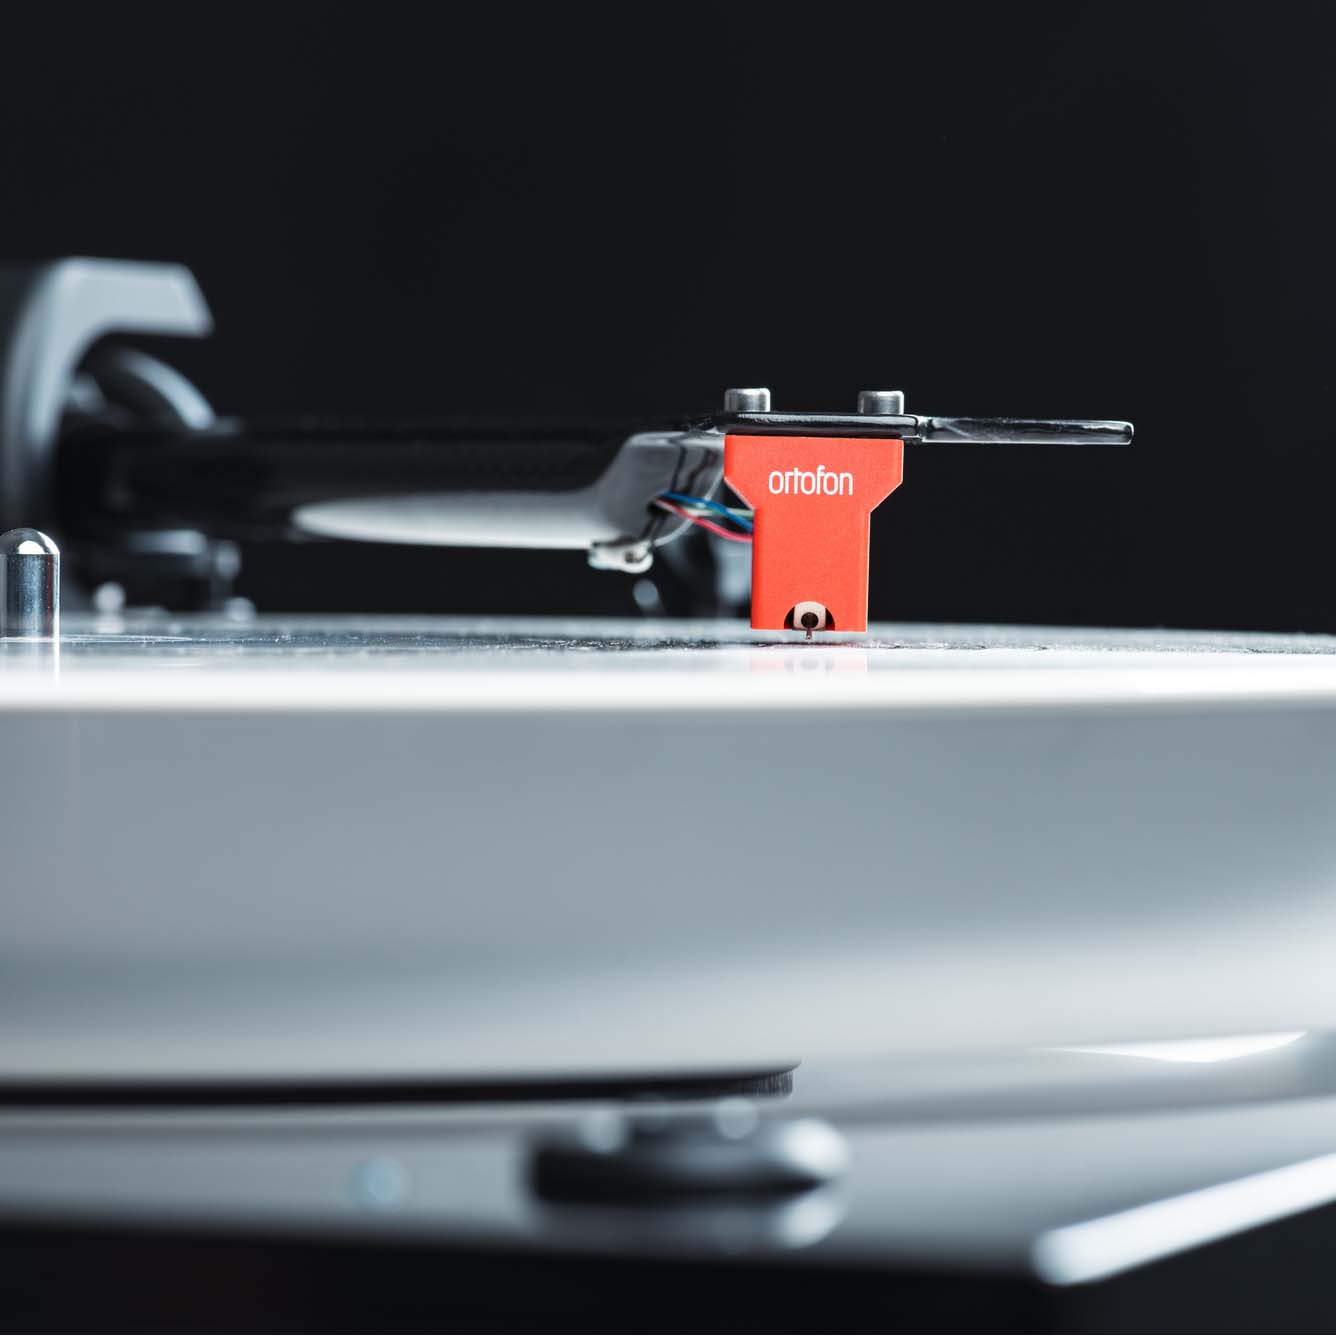 Pro-Ject X2 B Turntable with Ortofon Quintet Red Factory Fitted - Walnut